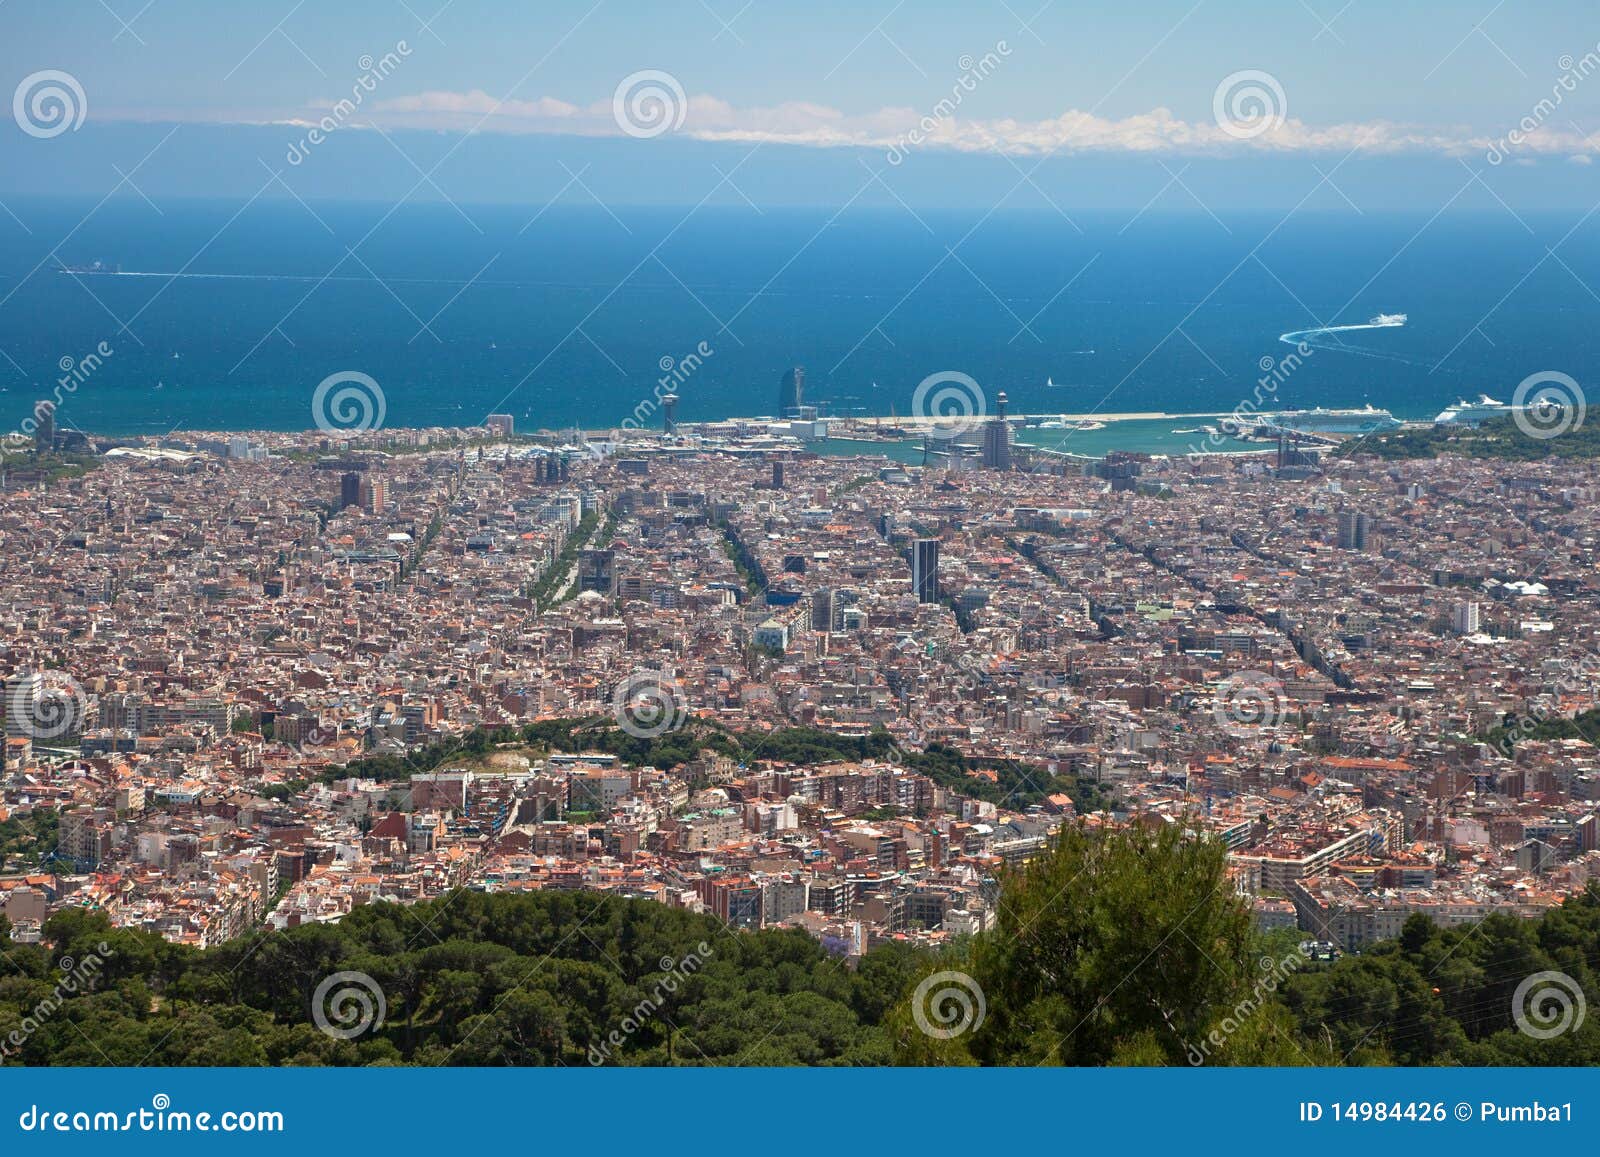 postcard view of barcelona from the tibidabo hill